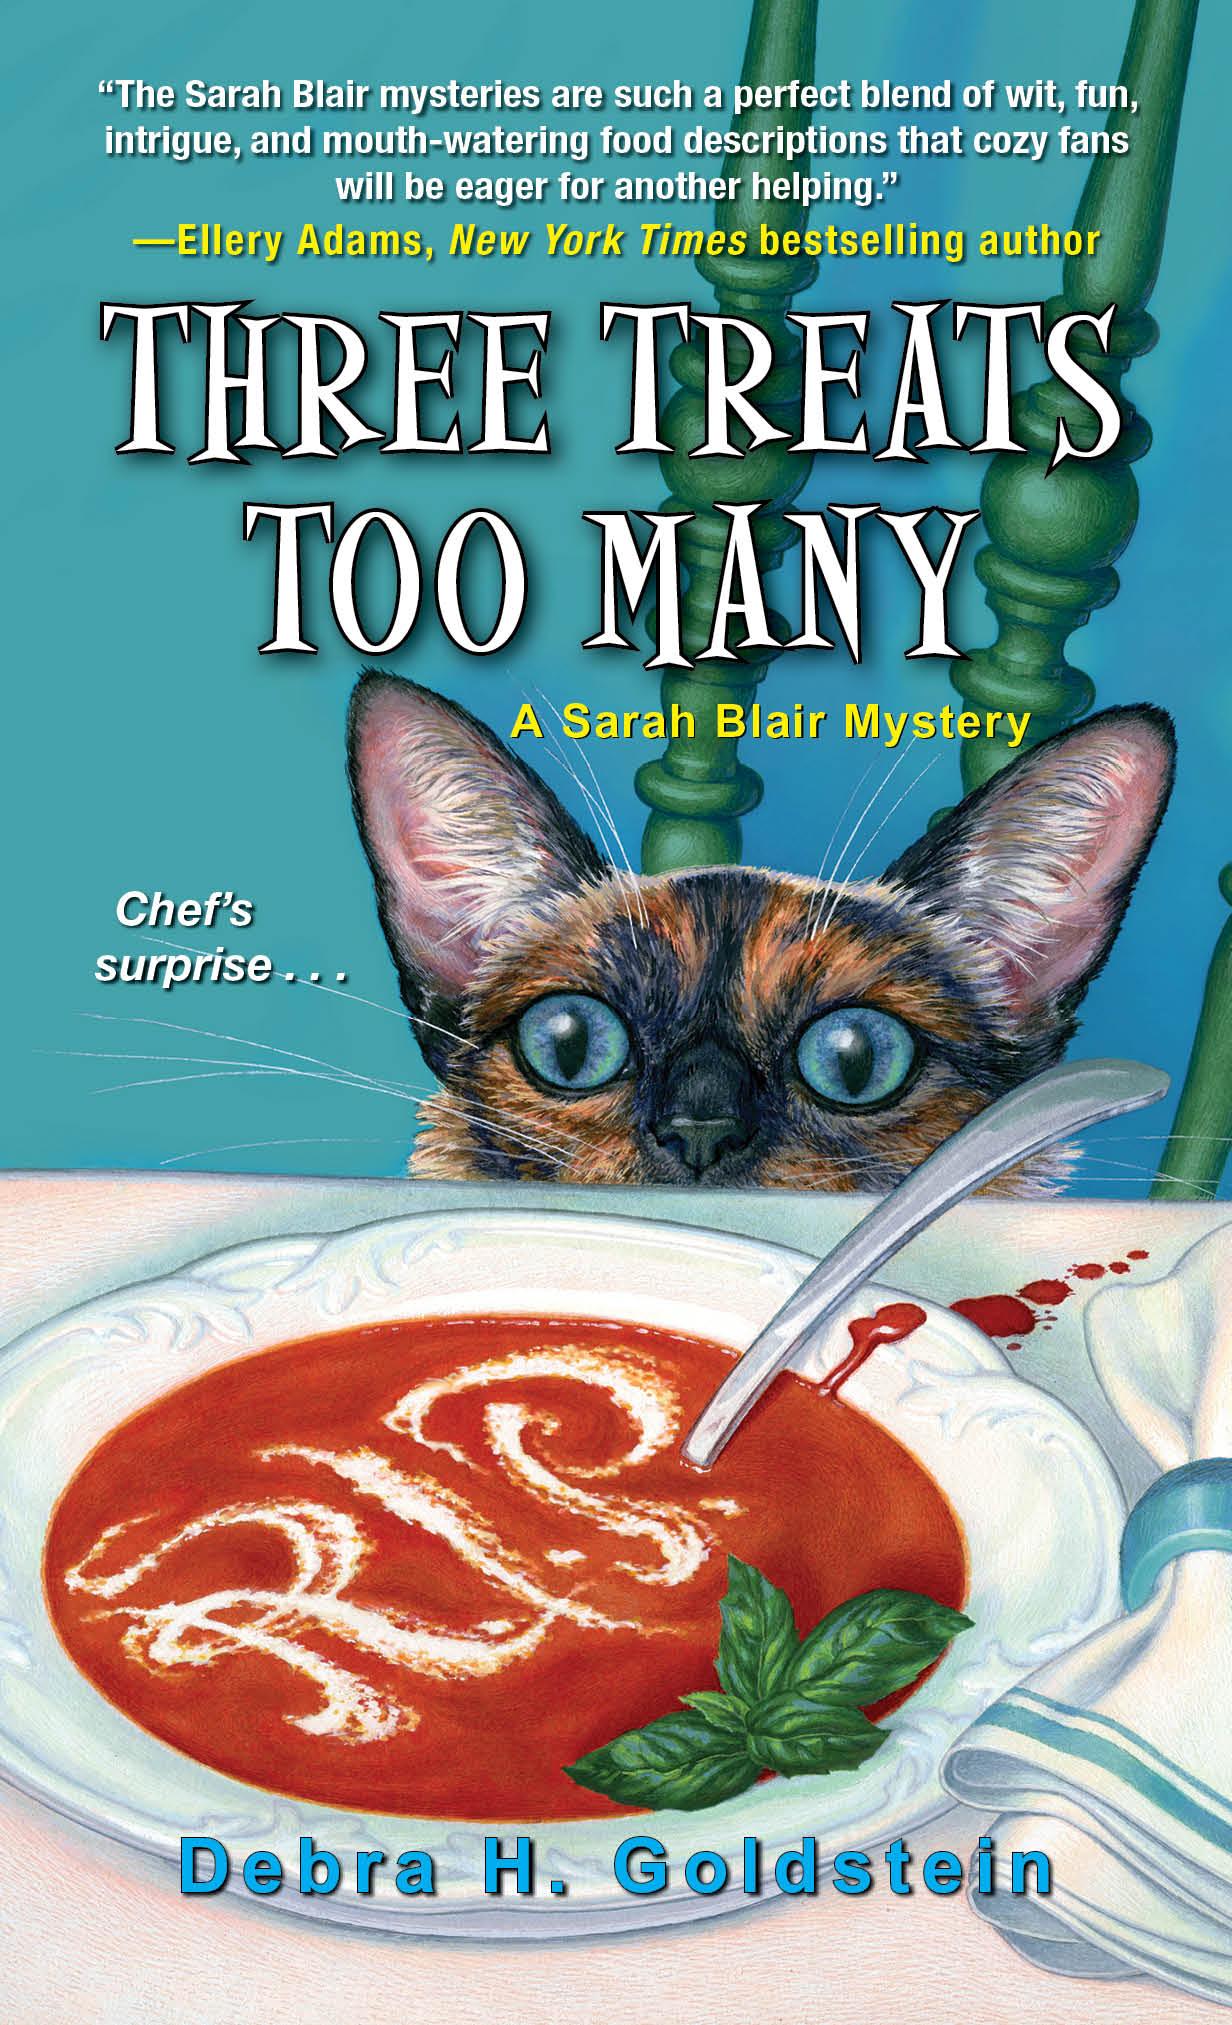 Book Cover - Free Cookbook - Simple Recipes for the Sometimes Sleuth